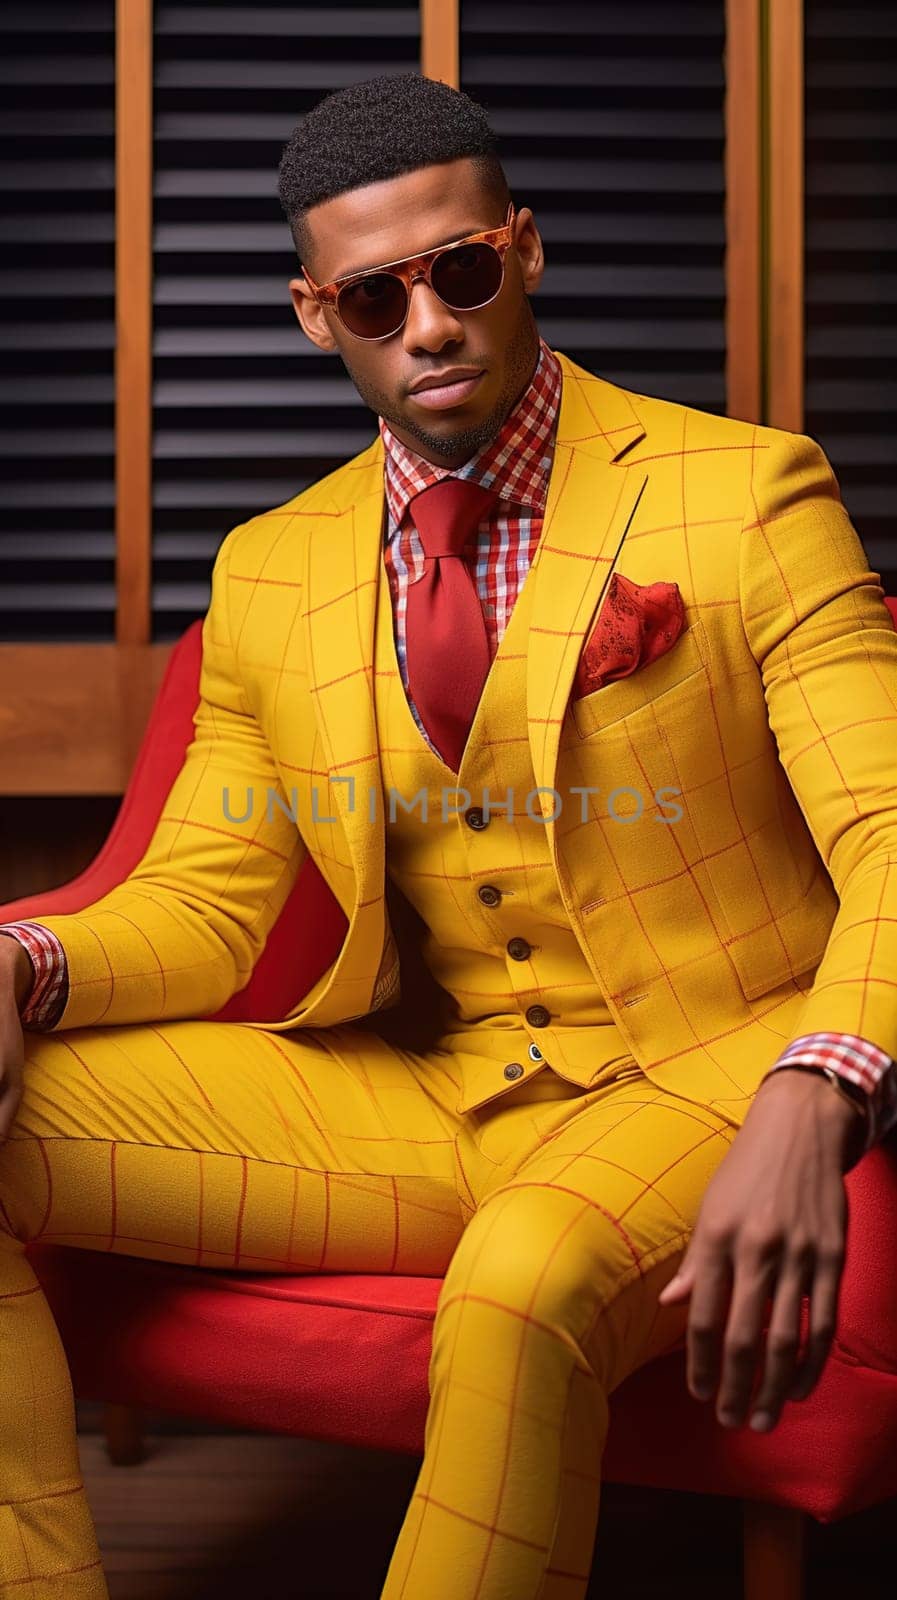 Stylish African-American man in a luxurious yellow suit. High quality photo